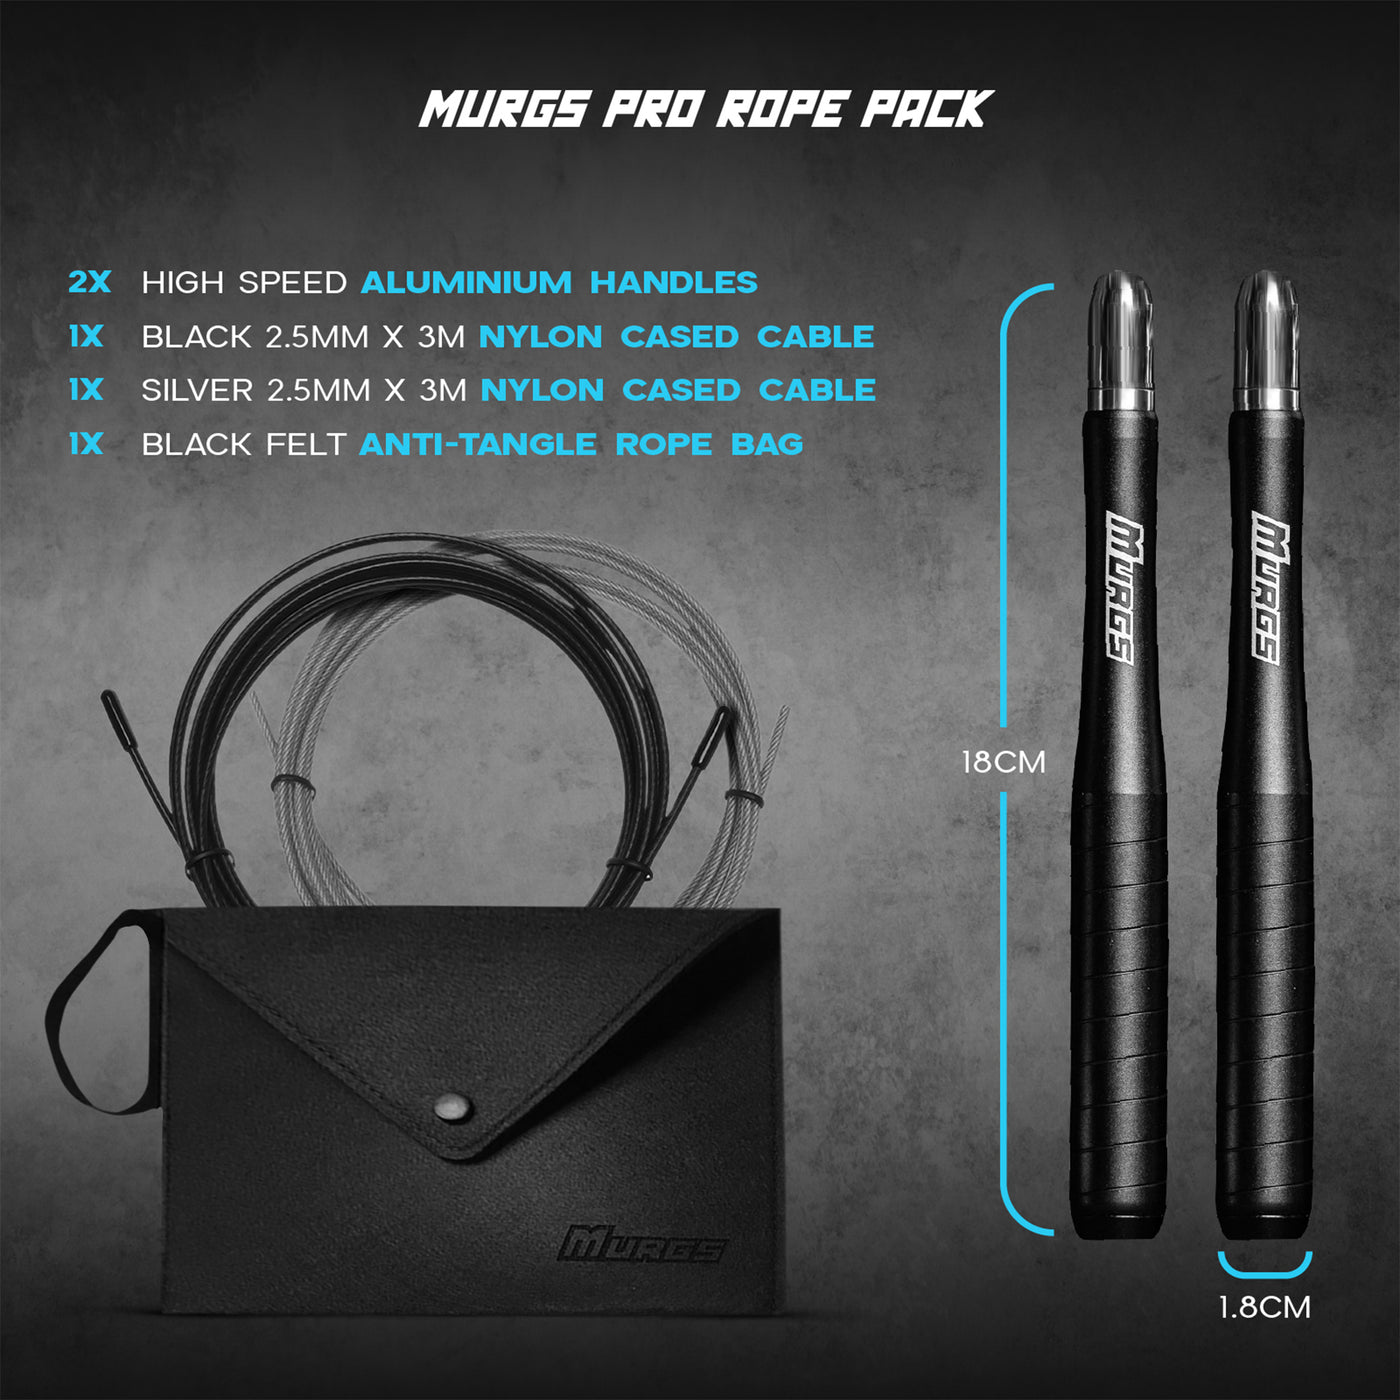 Murgs Pro Rope Pack Contents 